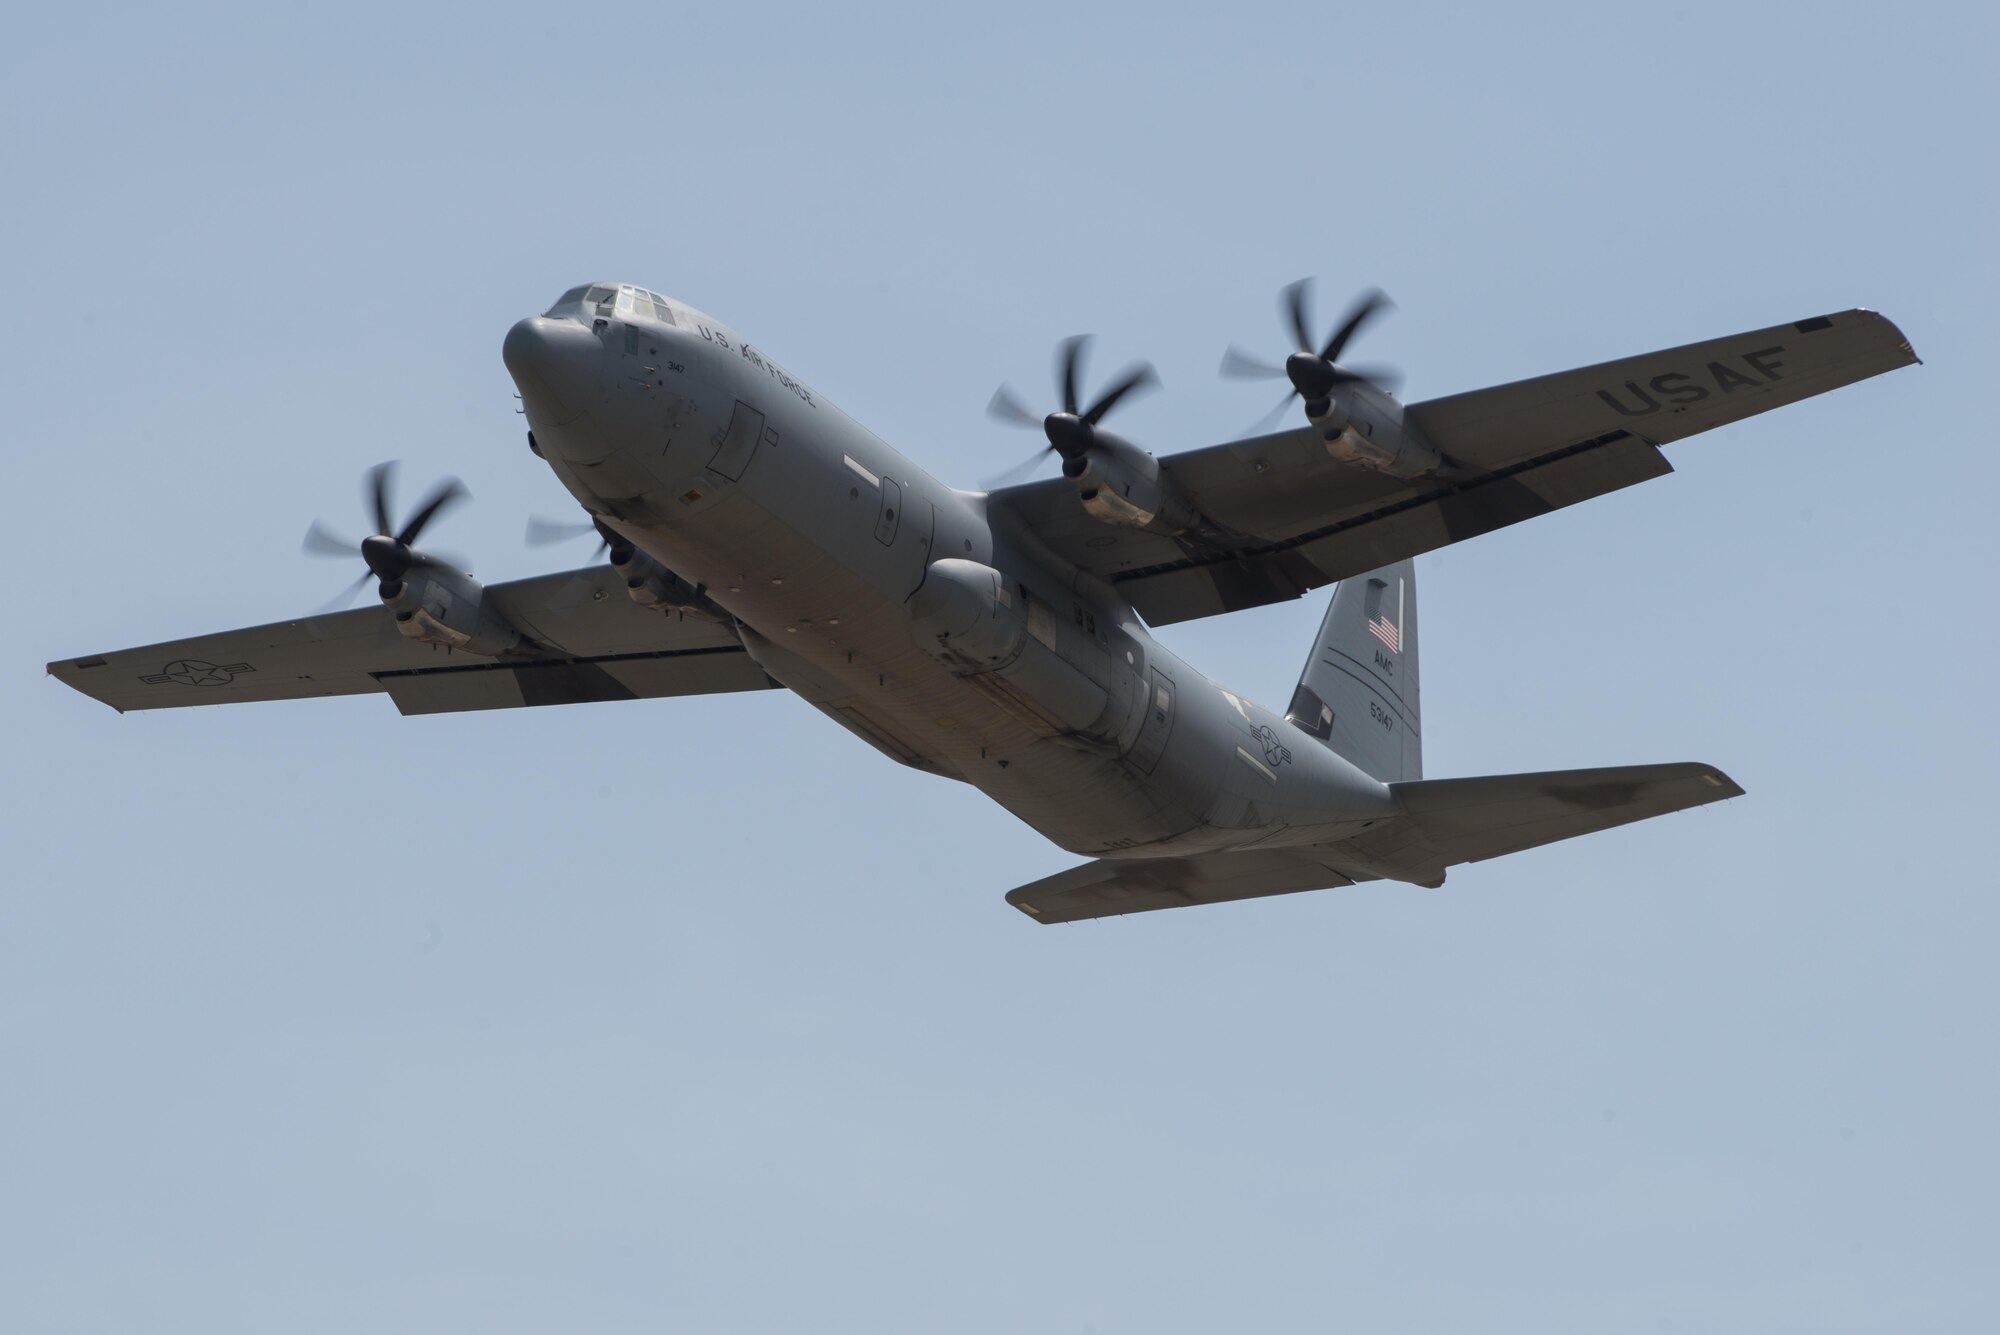 A U.S. Air Force C-130J Super Hercules aircraft takes off from Bagram Airfield, Afghanistan, after receiving maintenance from the 455th Expeditionary Aircraft Maintenance Squadron, May 5, 2015. The 455th EAMXS ensure Super Hercules on Bagram are prepared for flight and return them to a mission-ready state once they land. (U.S. Air Force photo by Tech. Sgt. Joseph Swafford/Released)